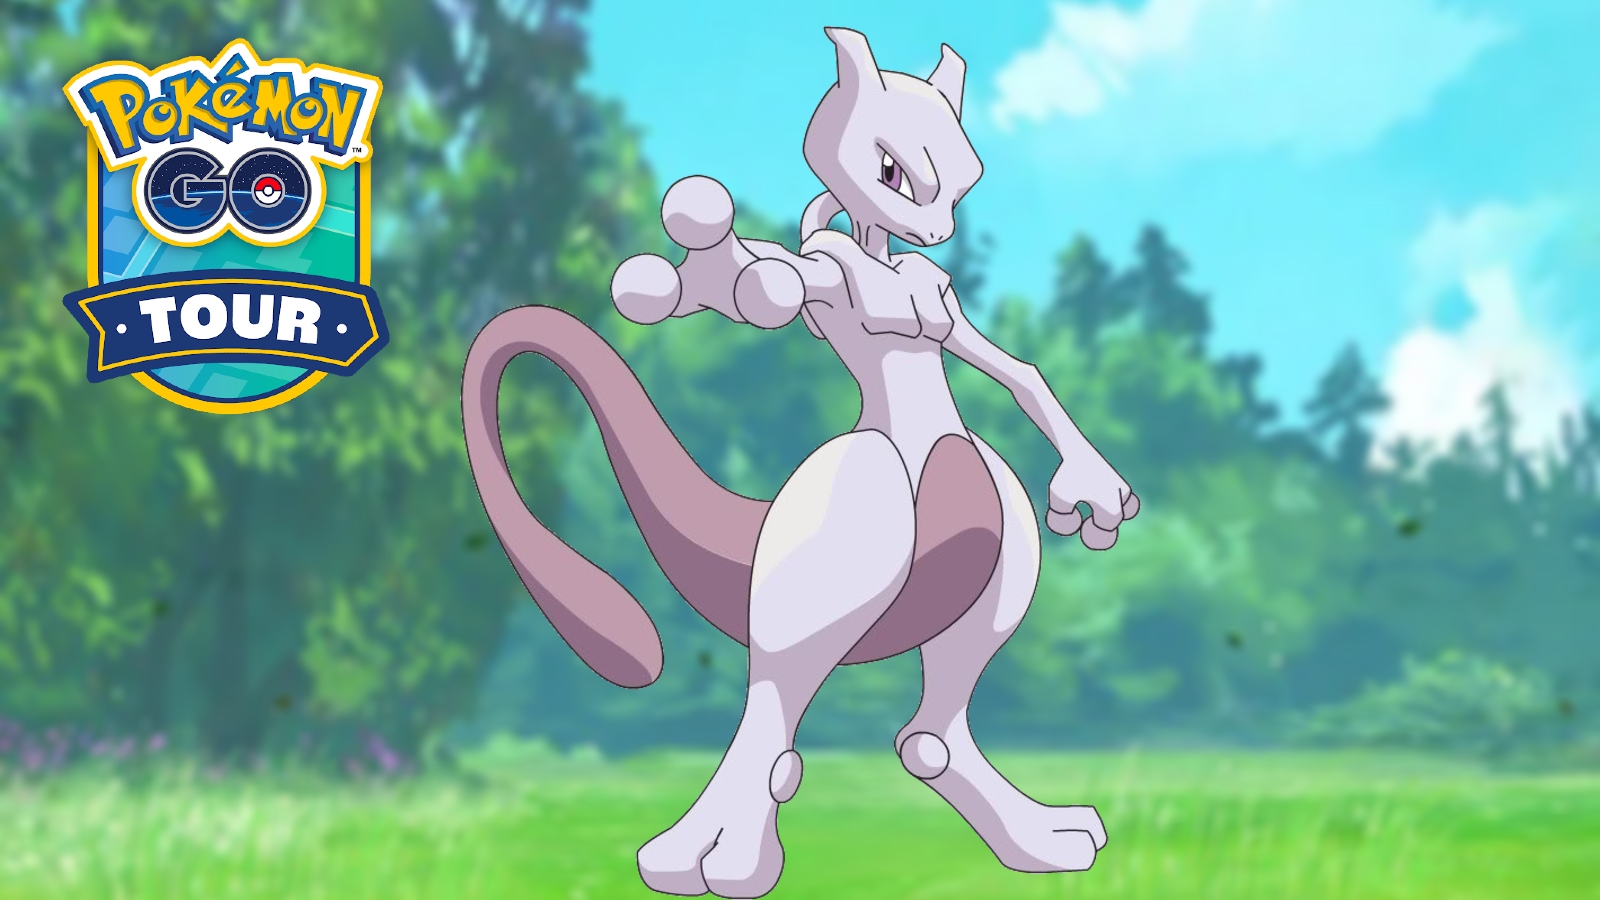 Pokemon Go Mewtwo Raid Guide: Best Counters, Weaknesses and